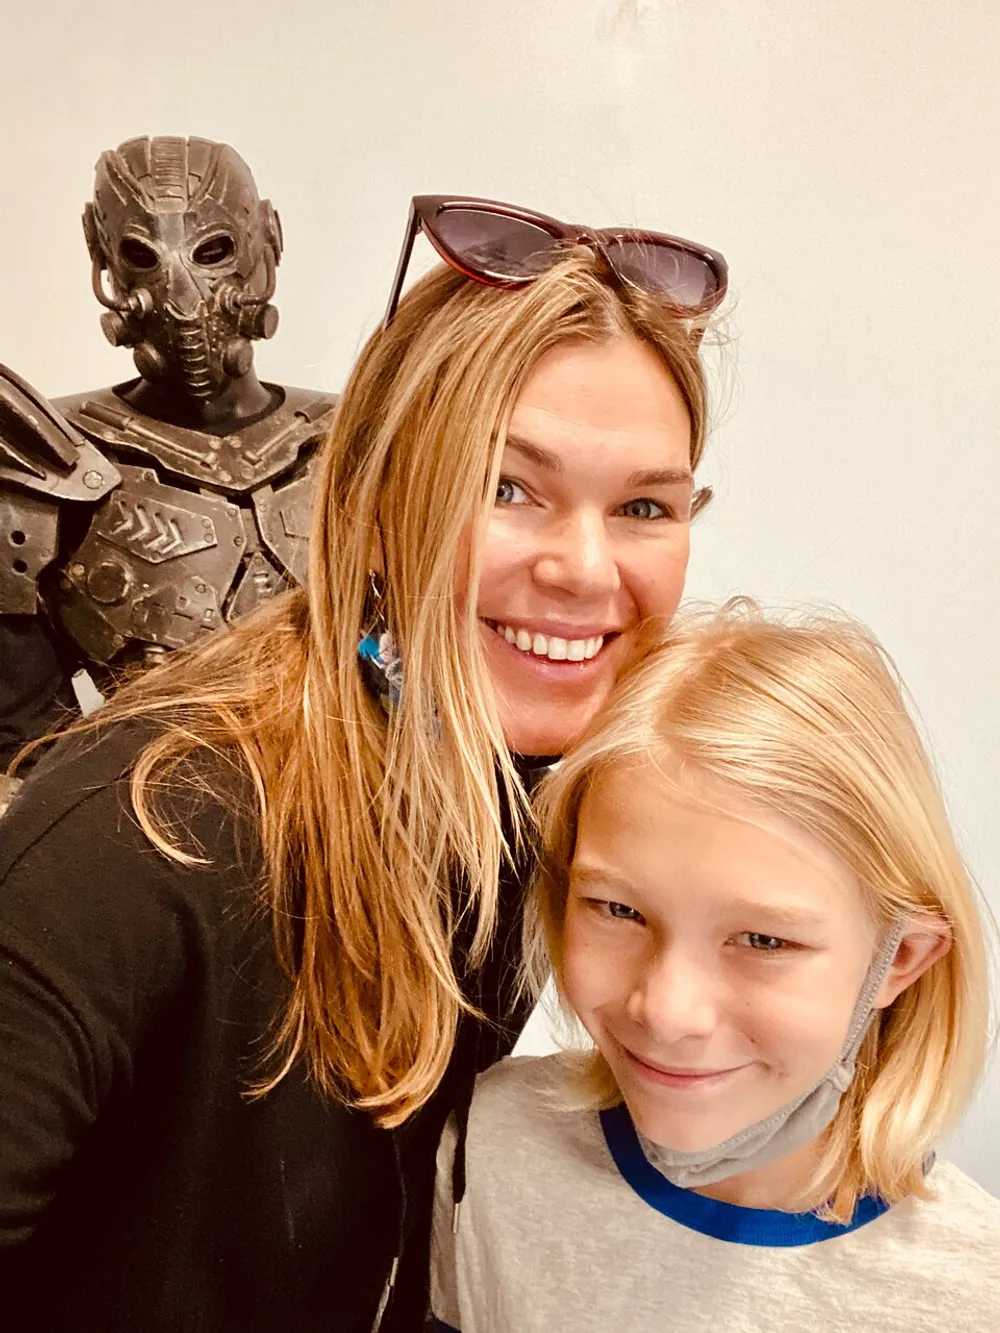 A smiling woman and a child pose for a selfie with a person wearing a robot-like costume in the background